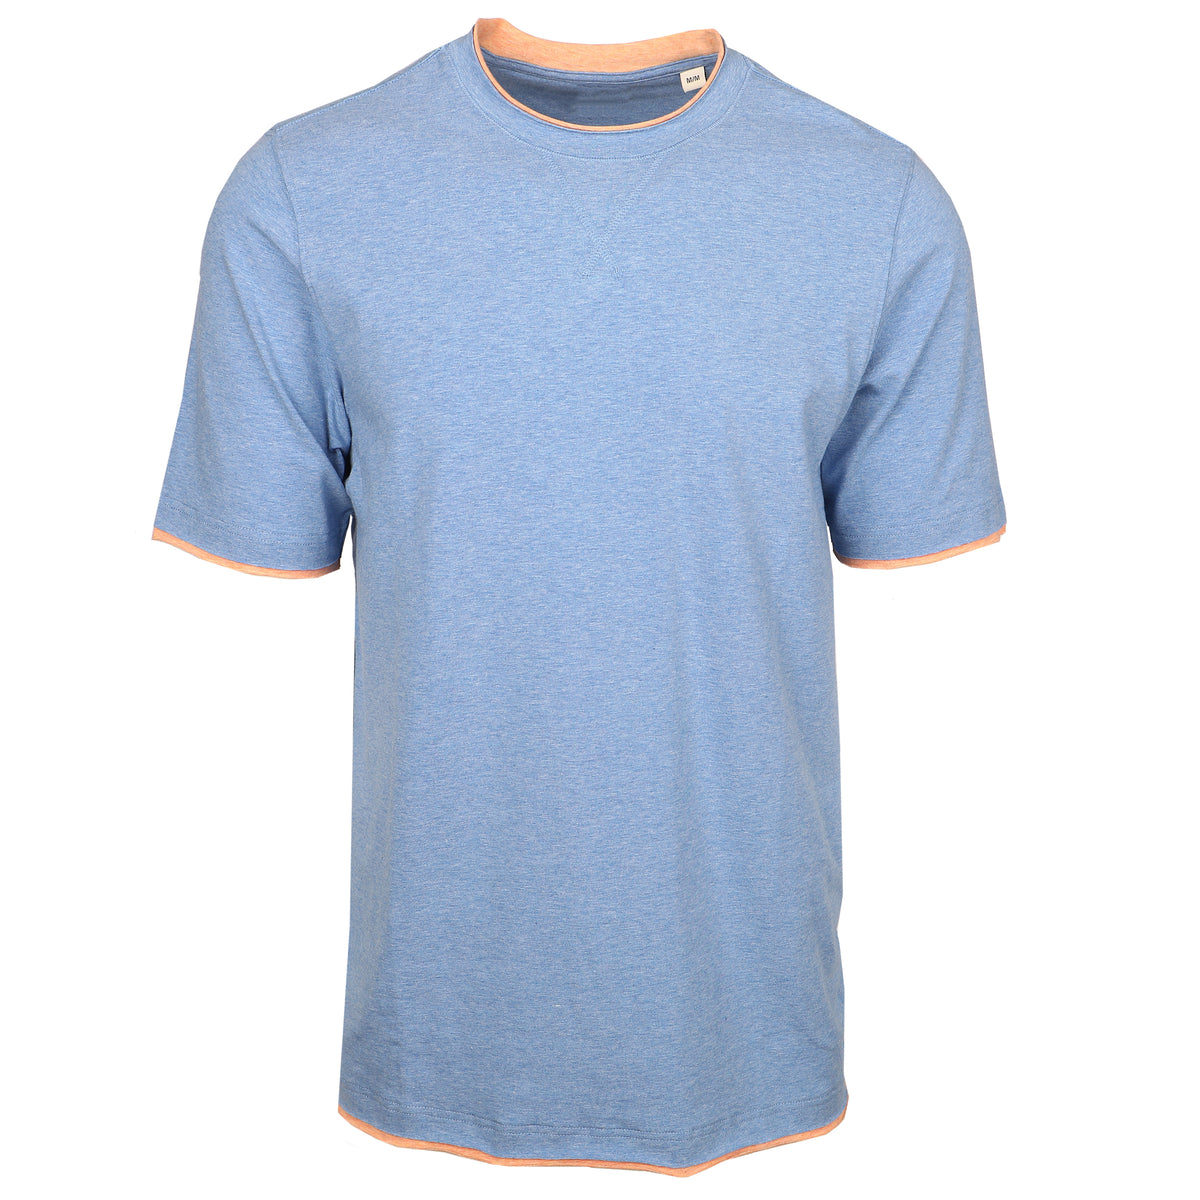 Step out into the warm weather in confidence with the Pompeii Melange Contrast Crew T-Shirt. Crafted from 100% cotton, this mid-blue t-shirt stands out with a sharp orange contrast. Take on the summer with a daring fashion statement and make a statement wherever you go.   100% Luxe Cotton • Relaxed Fit • Contrast Edging • Machine Washable • Imported